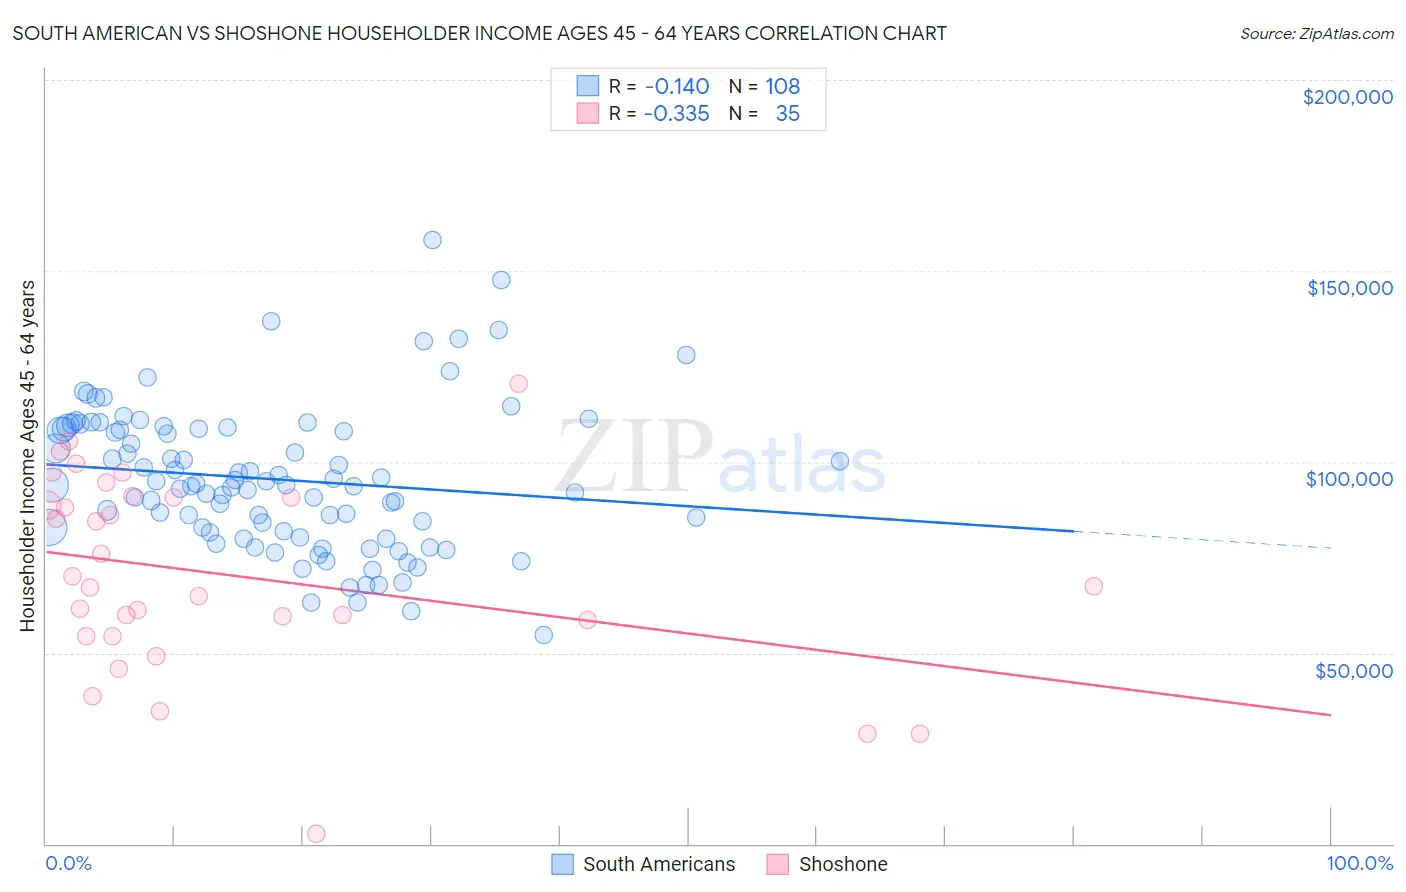 South American vs Shoshone Householder Income Ages 45 - 64 years